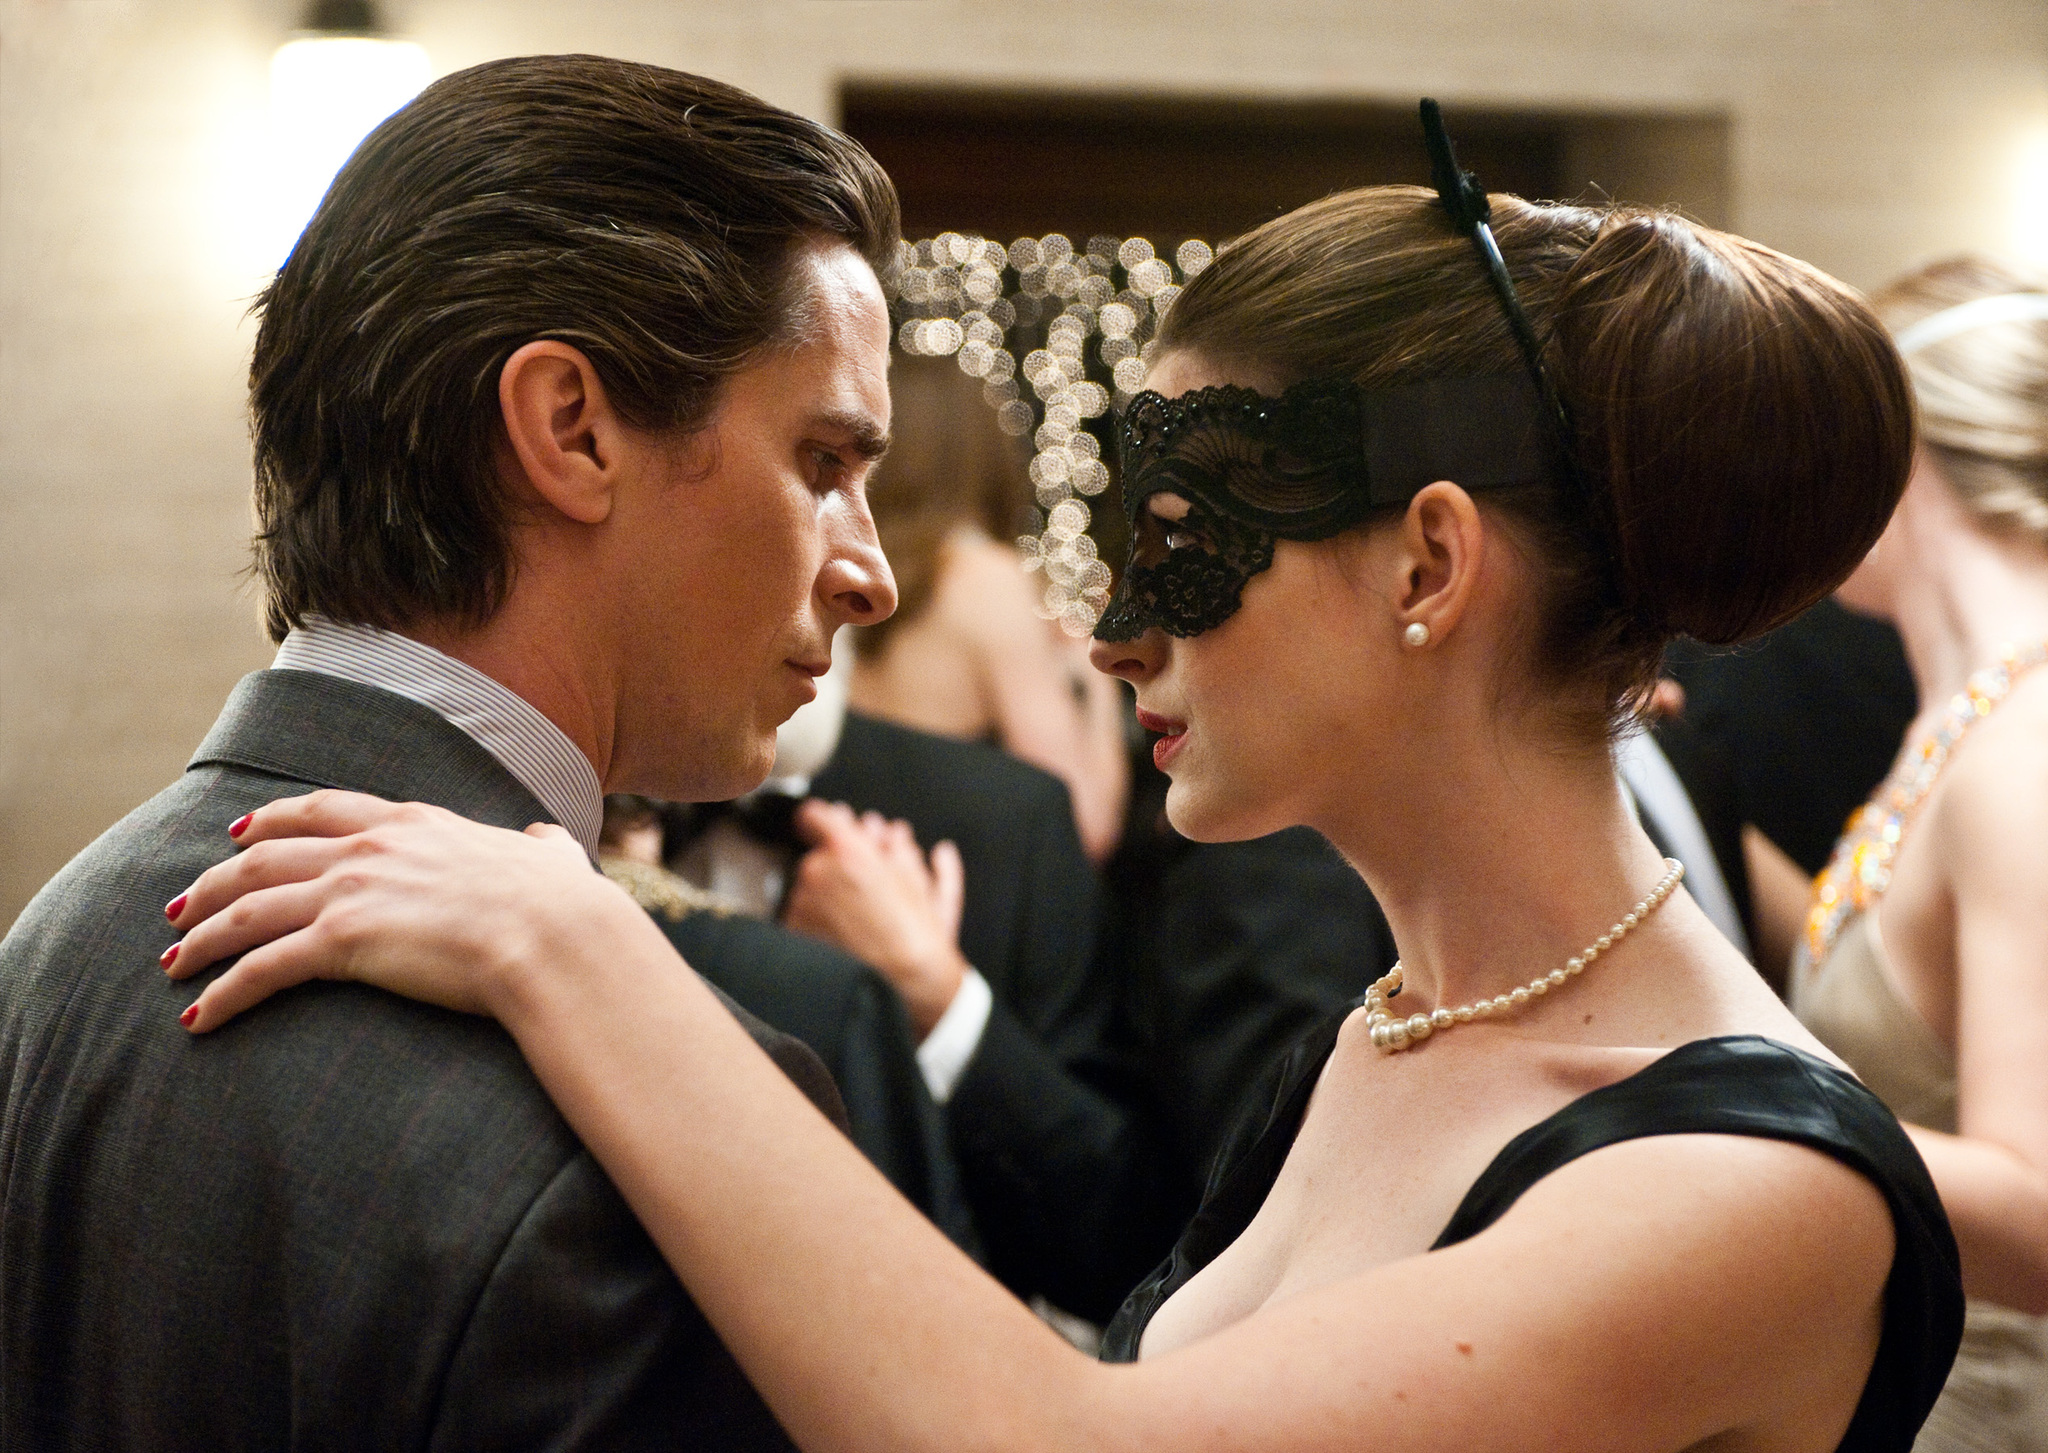 Still of Christian Bale and Anne Hathaway in Tamsos riterio sugrizimas (2012)